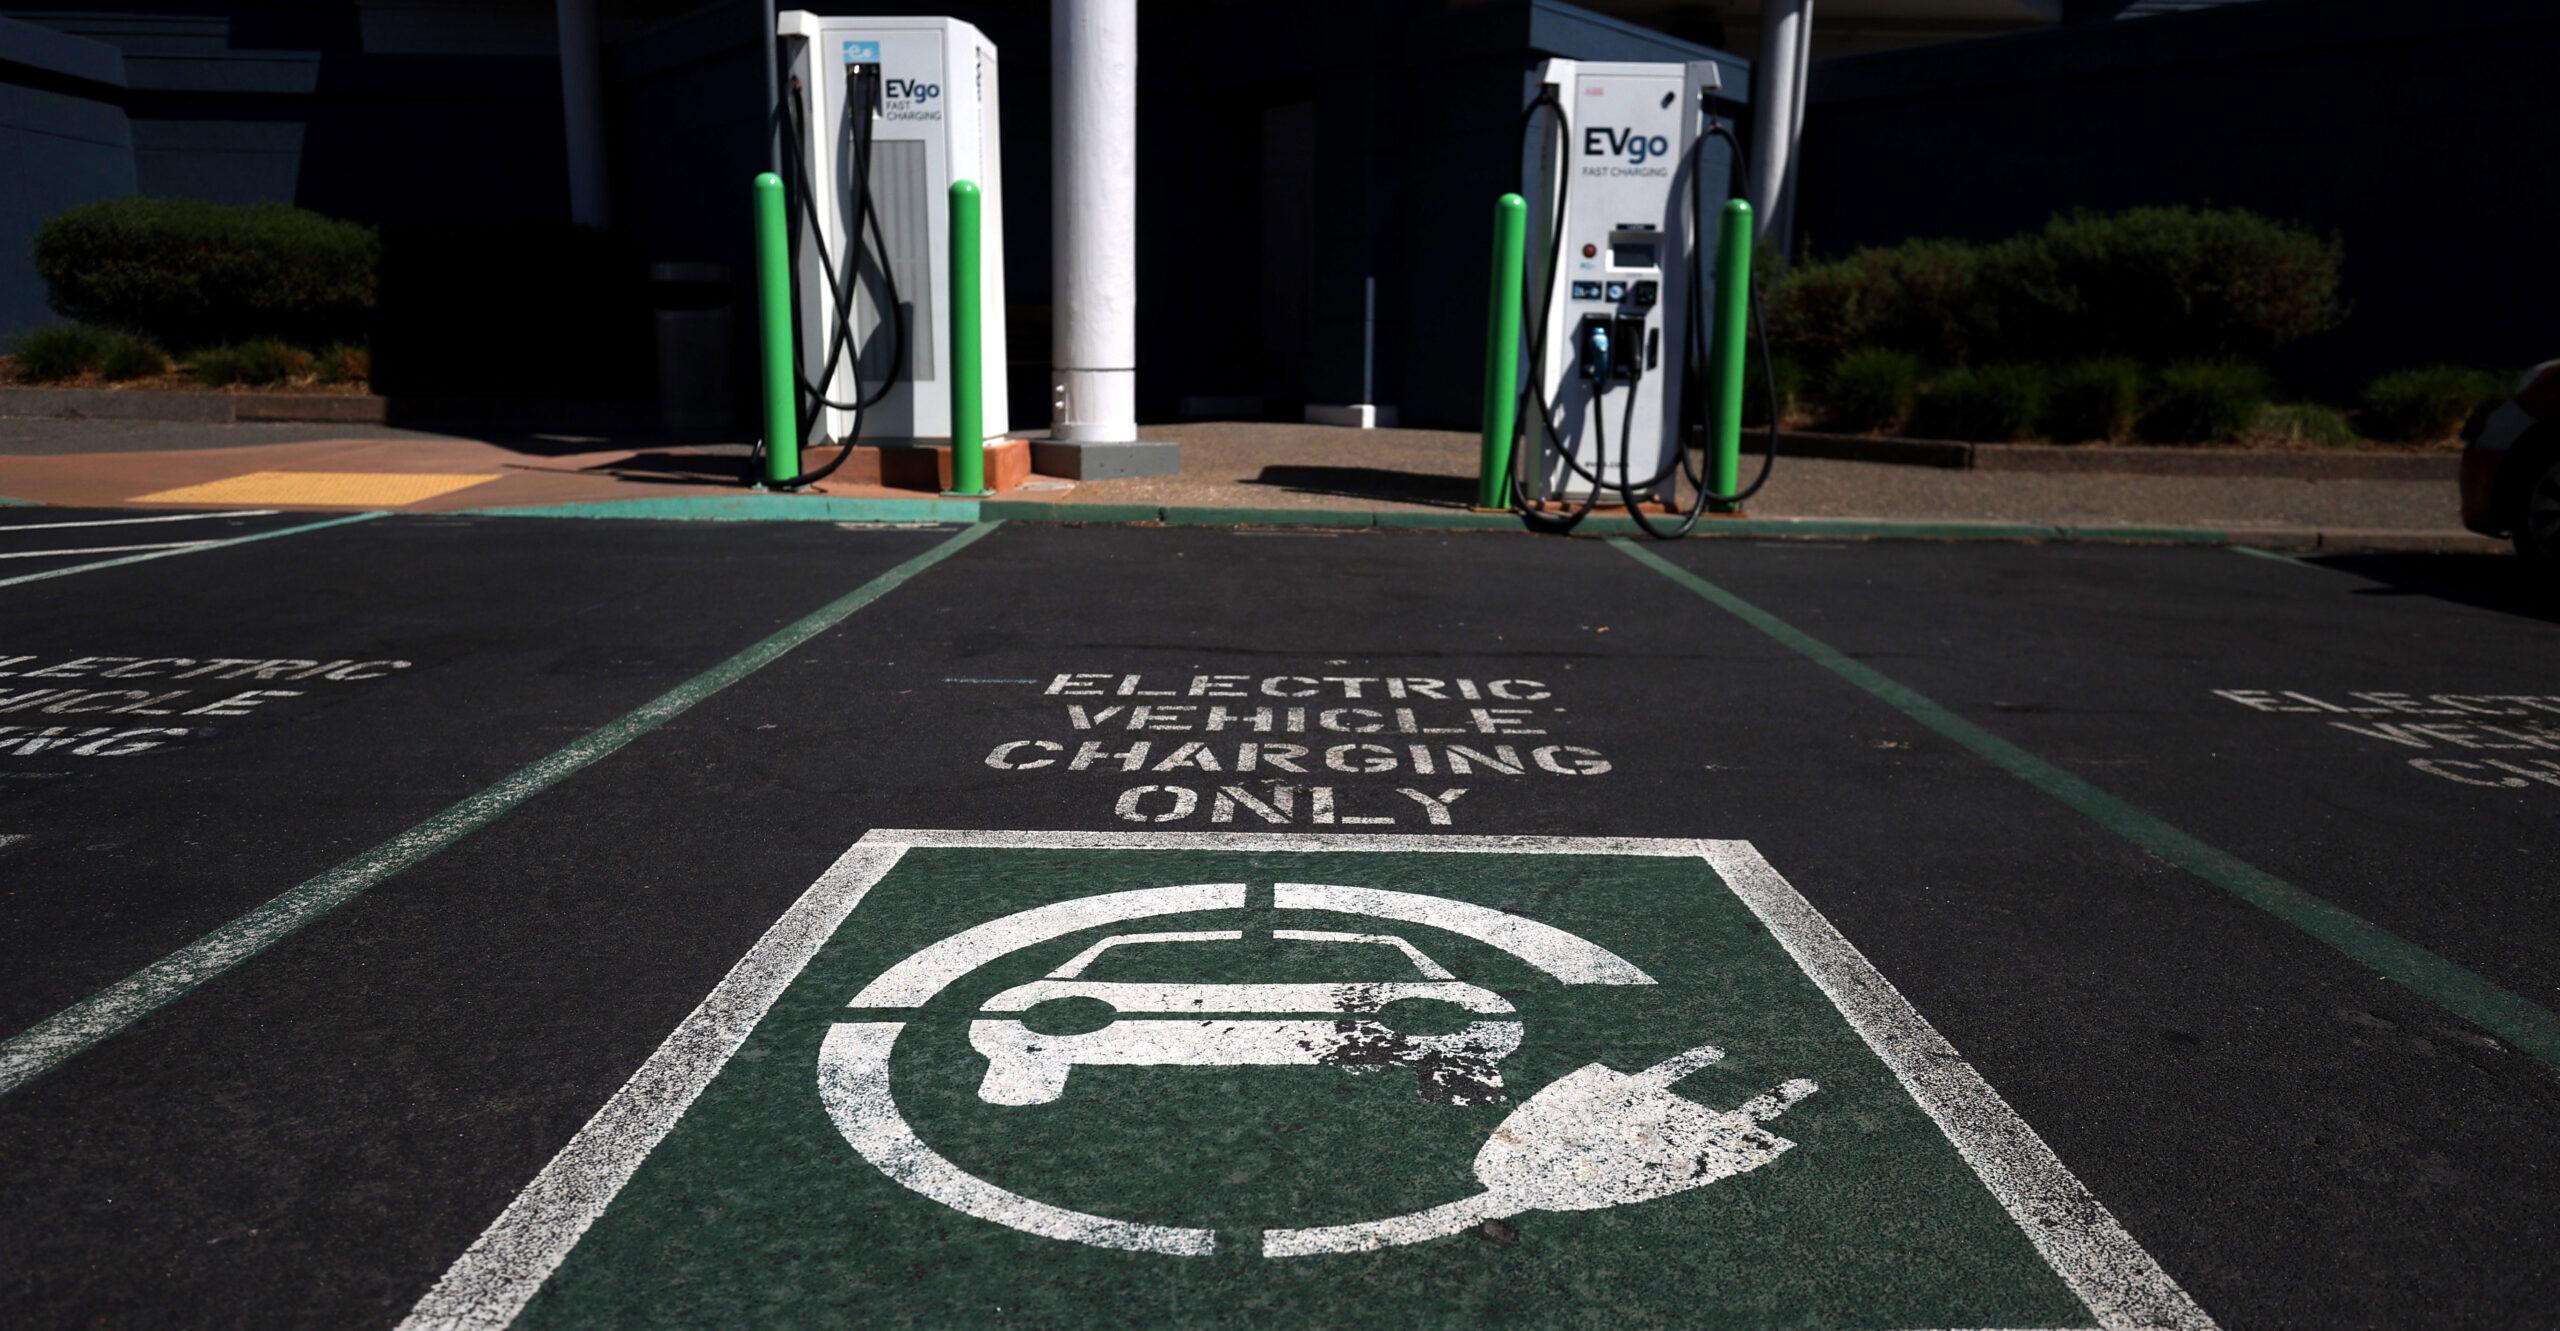 California's EV Agenda Will Require Massive and Costly Infrastructure Upgrades, Analysis Finds